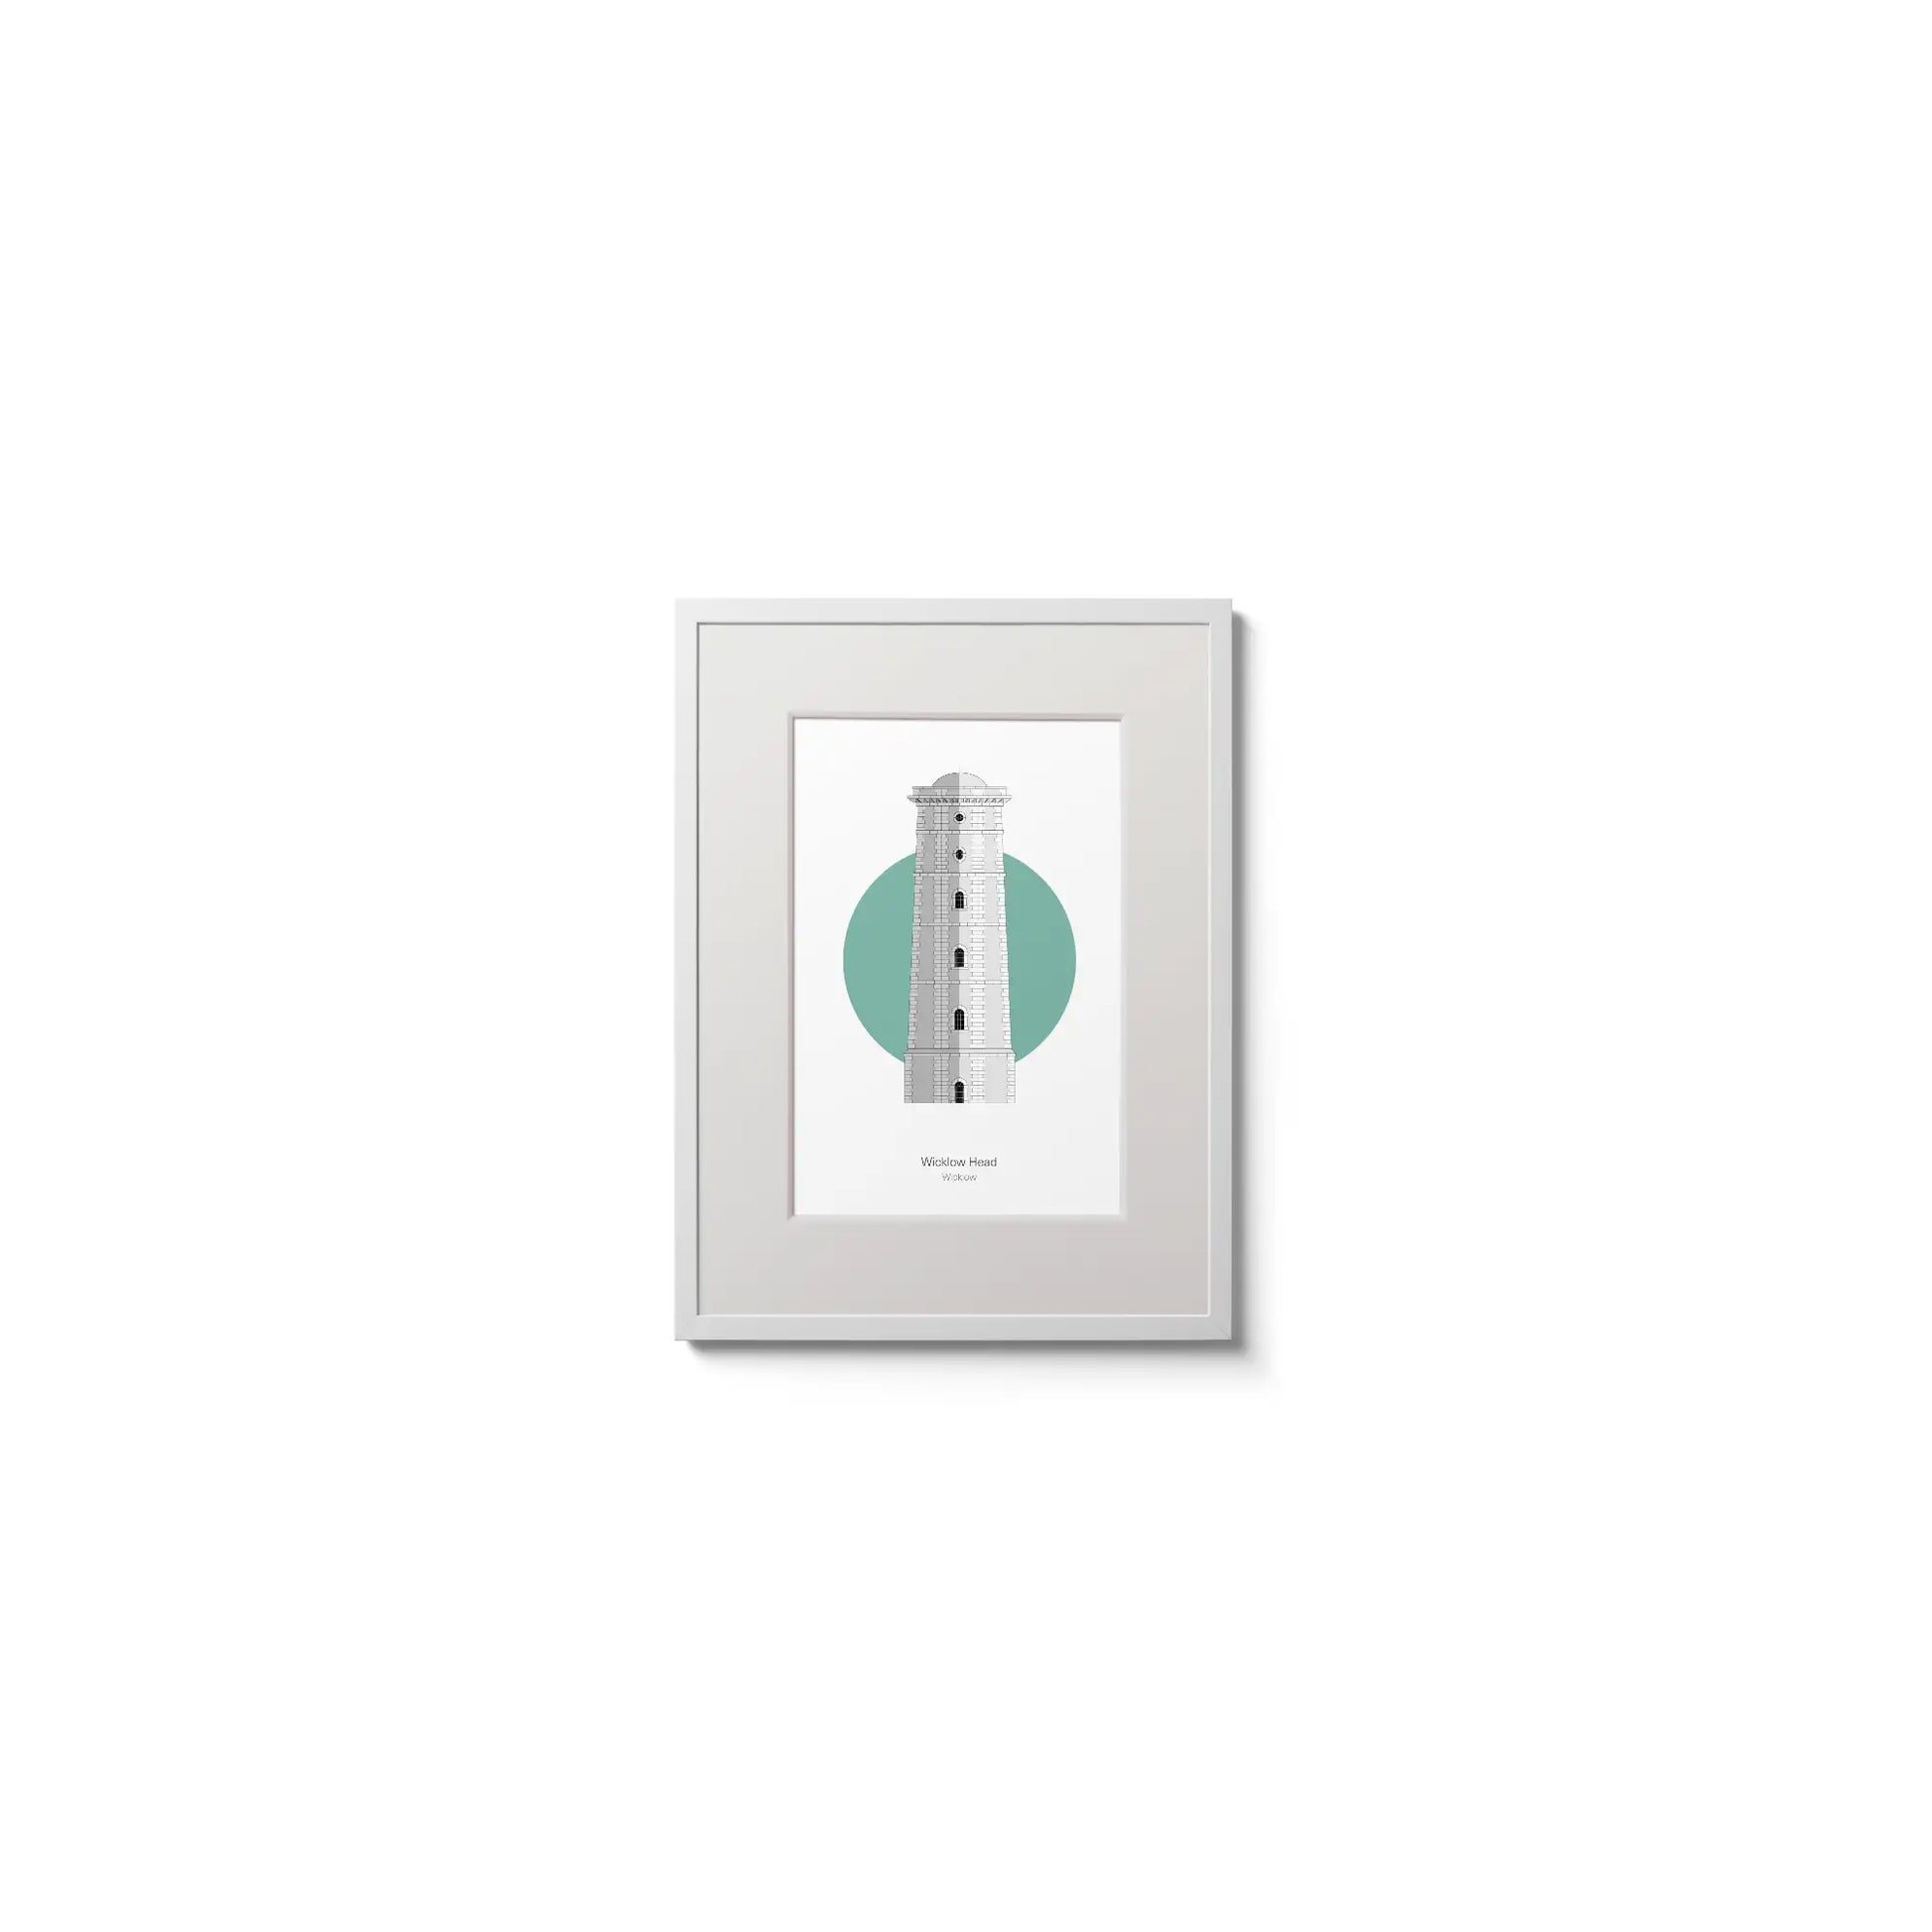 Illustration of Wicklow lighthouse on a white background inside light blue square,  in a white frame measuring 15x20cm.